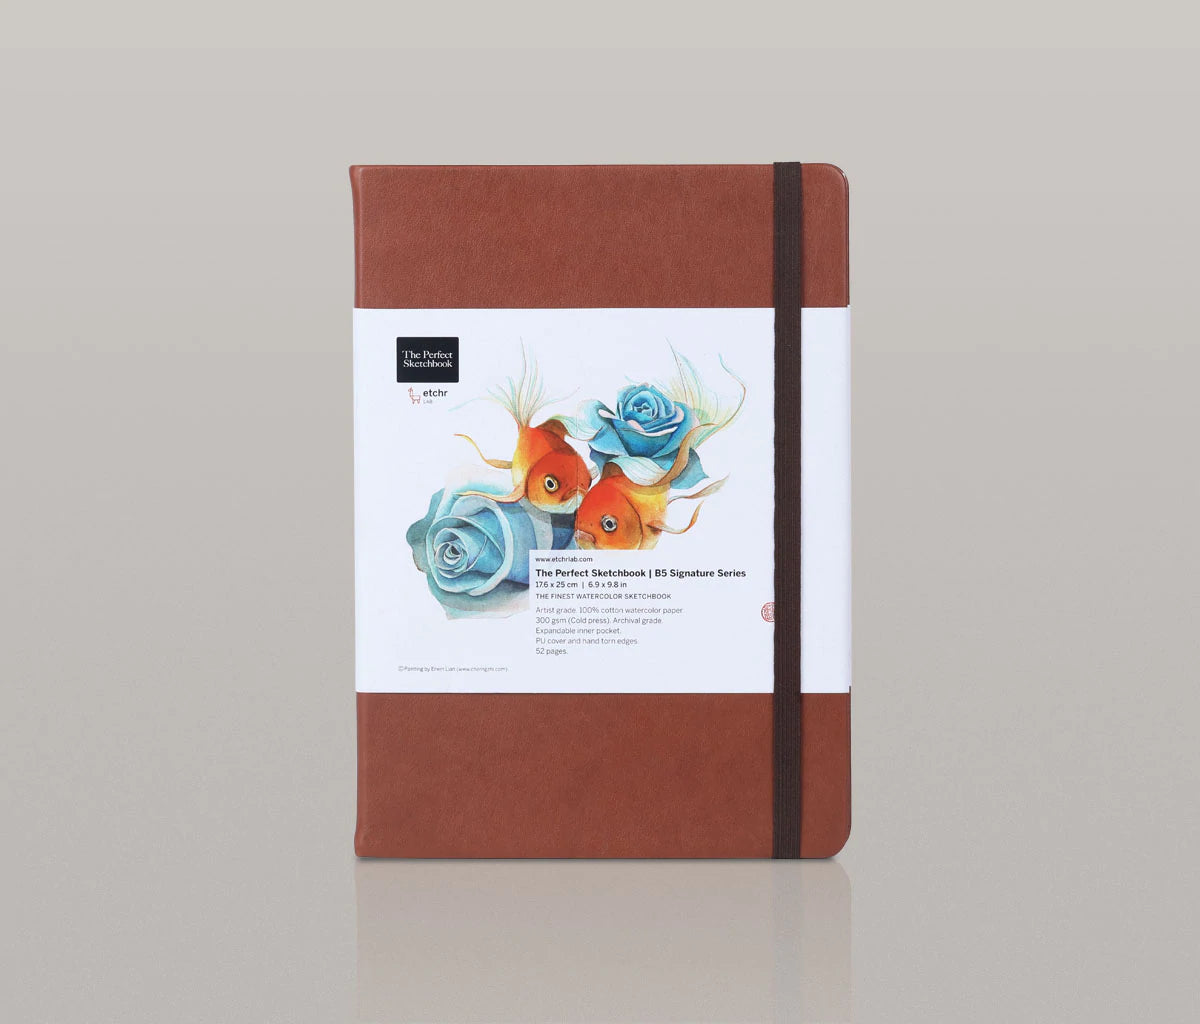 Etchr : The Perfect Sketchbook - Signature Series 2021